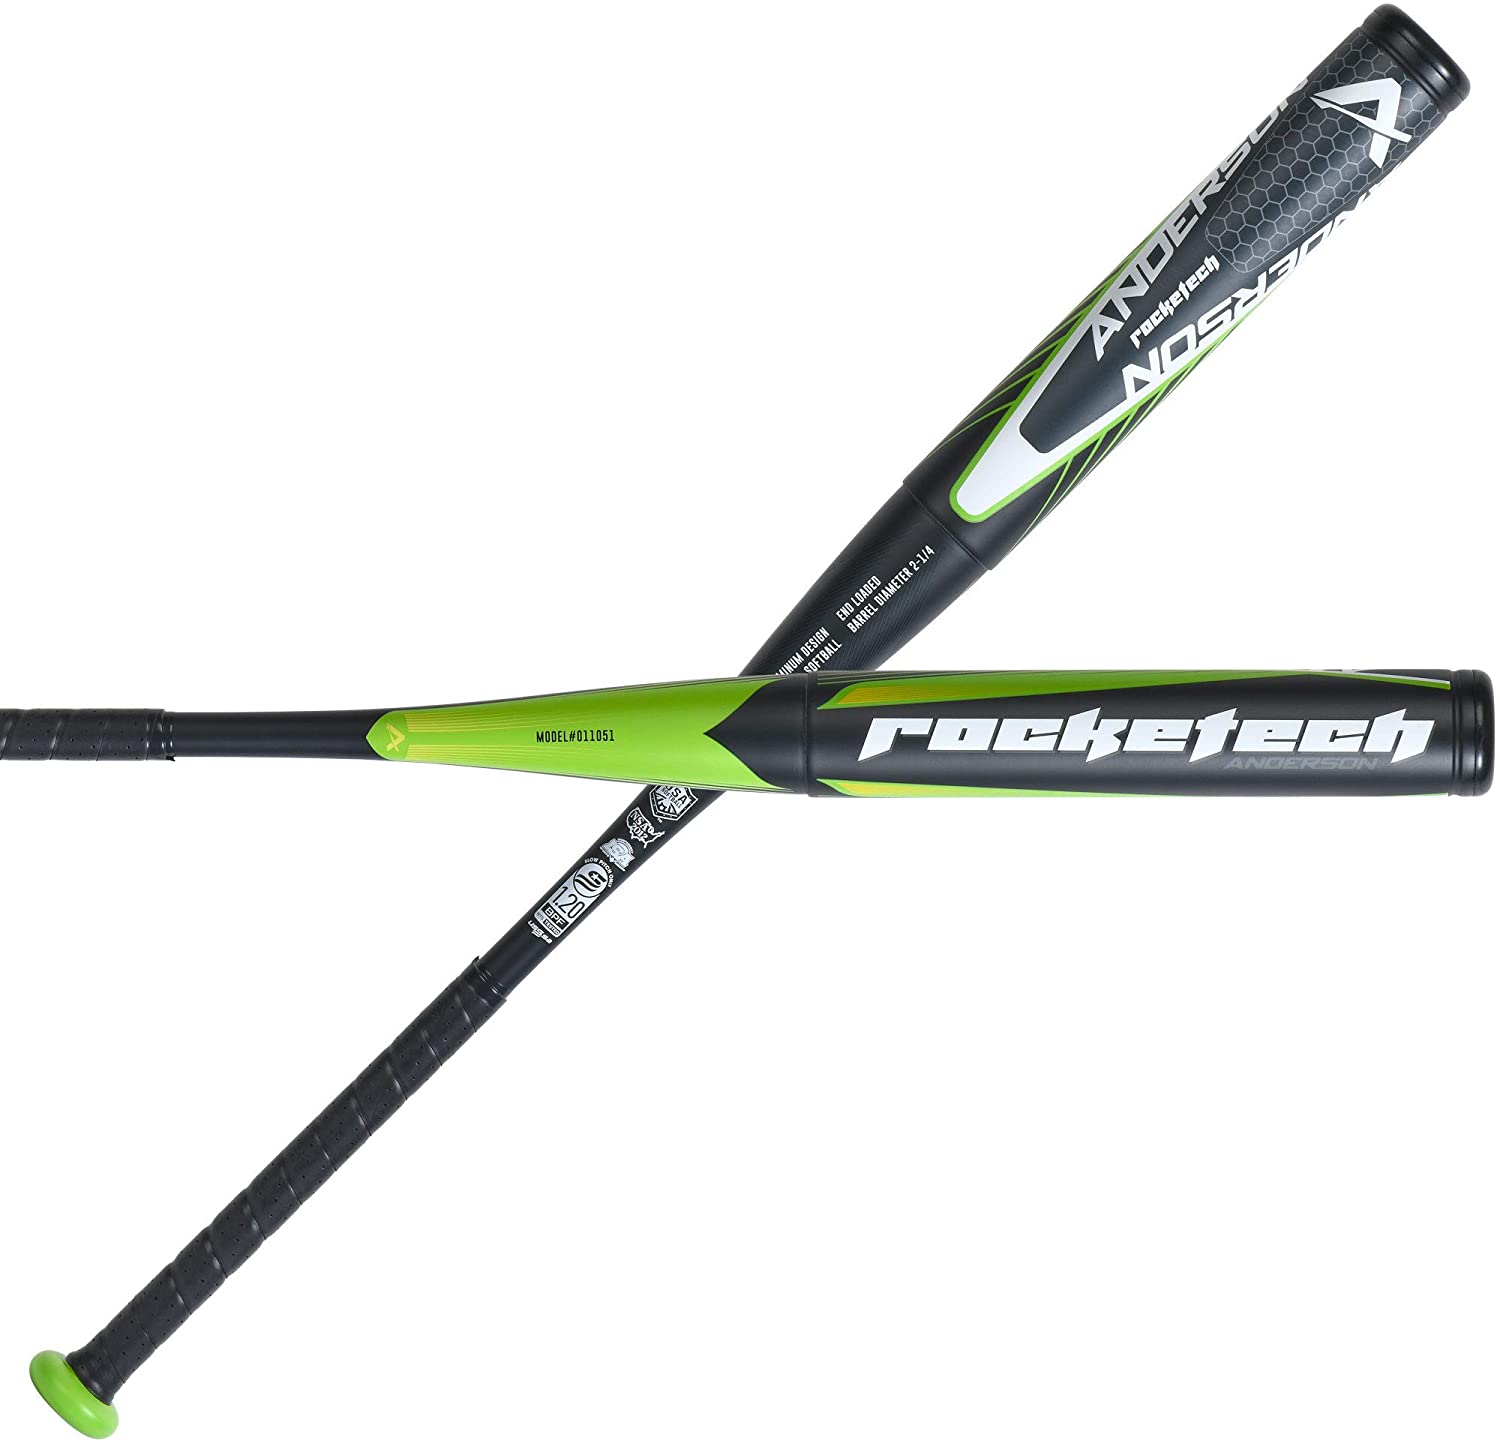 For over 15 years the Anderson Rocketech has been dominating the double wall alloy slowpitch market. Our 2021 Rocketech boasts our patented double wall design giving this bat tons of pop along with the durability that is commonly associated with the Rocketech name. The Rocketech Slowpitch is in a class of its own giving players the performance of a double wall bat while maintaining the solid feeling of a one-piece alloy bat. Our patented double wall design allows this bat to have an end loaded feel to go with the unbelievable power. Features: End loaded Weight Distribution helps to provide more mass & power behind every swing Double Wall Alloy outer sleeve provides maximum performance and durability Double Wall Design allows for massive pop and durability in all types of weather. Available in 26oz, 27oz, 28oz, and 30oz. Specs: 2 ¼ Barrel Diameter Constructed from 7075 alloy Approved for play in; USA/ASA, USSSA, ISA, and NSA